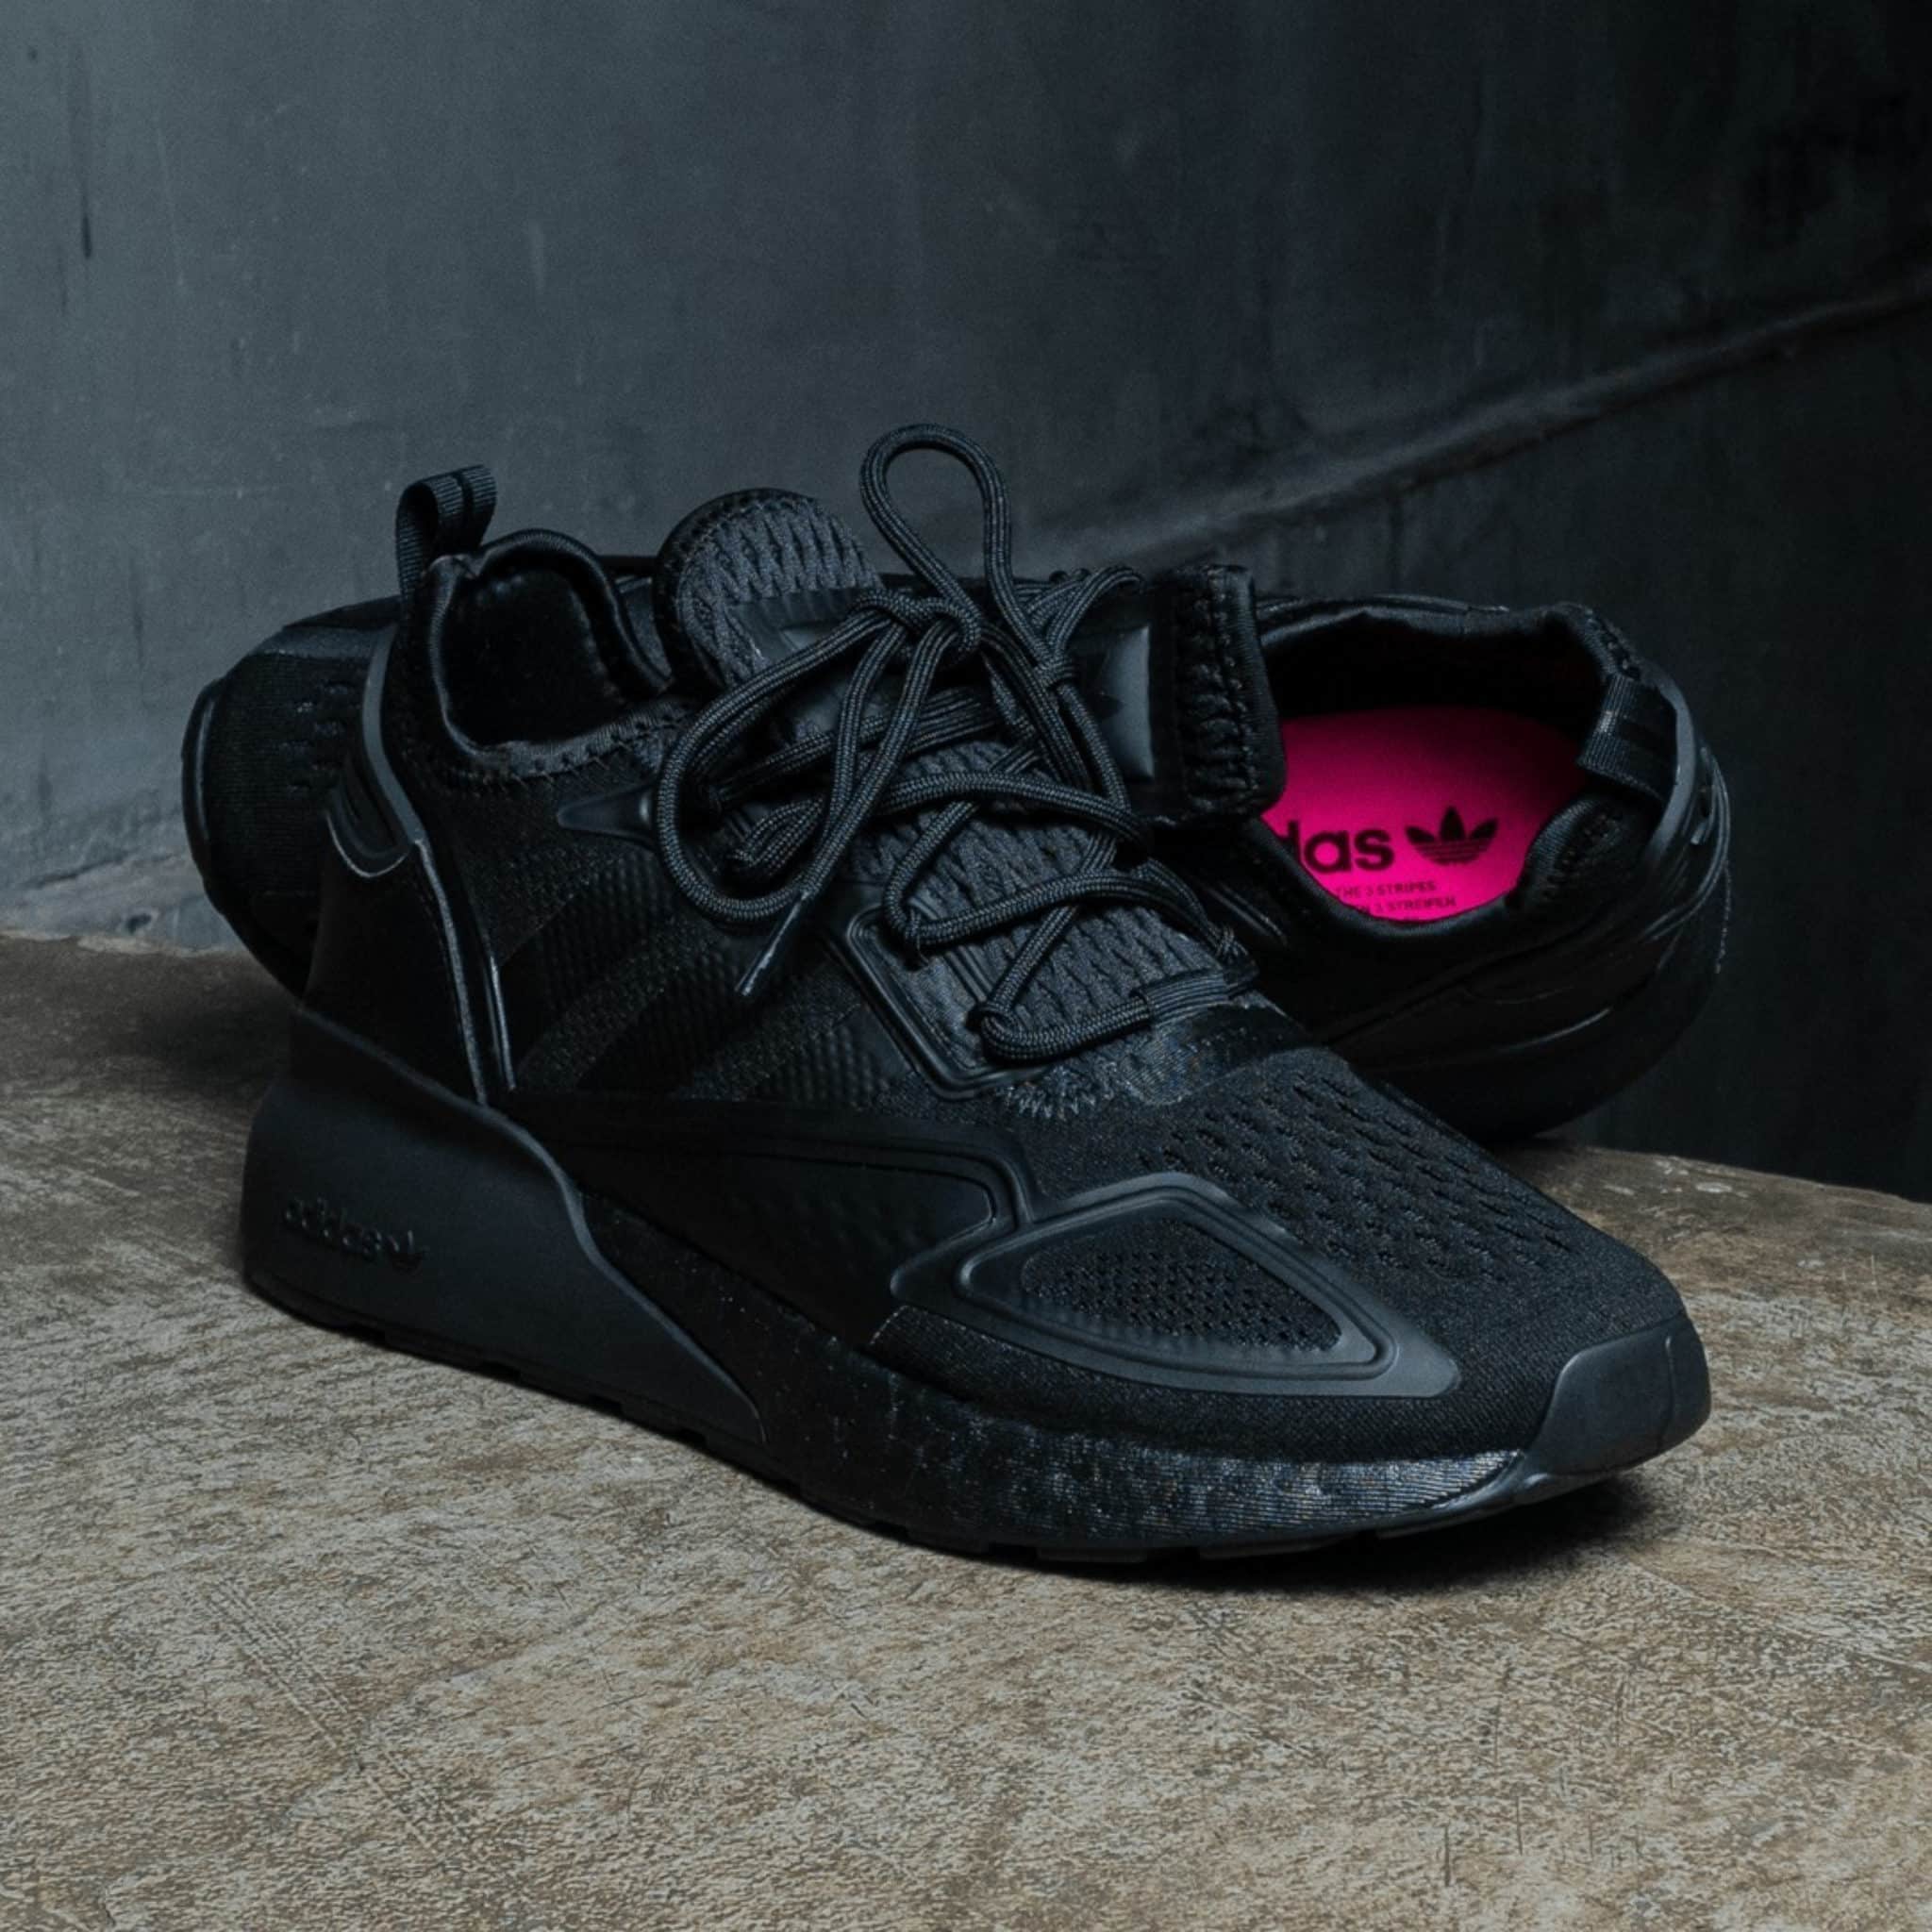 Adidas Zx 2k goes stealth with core black colorway